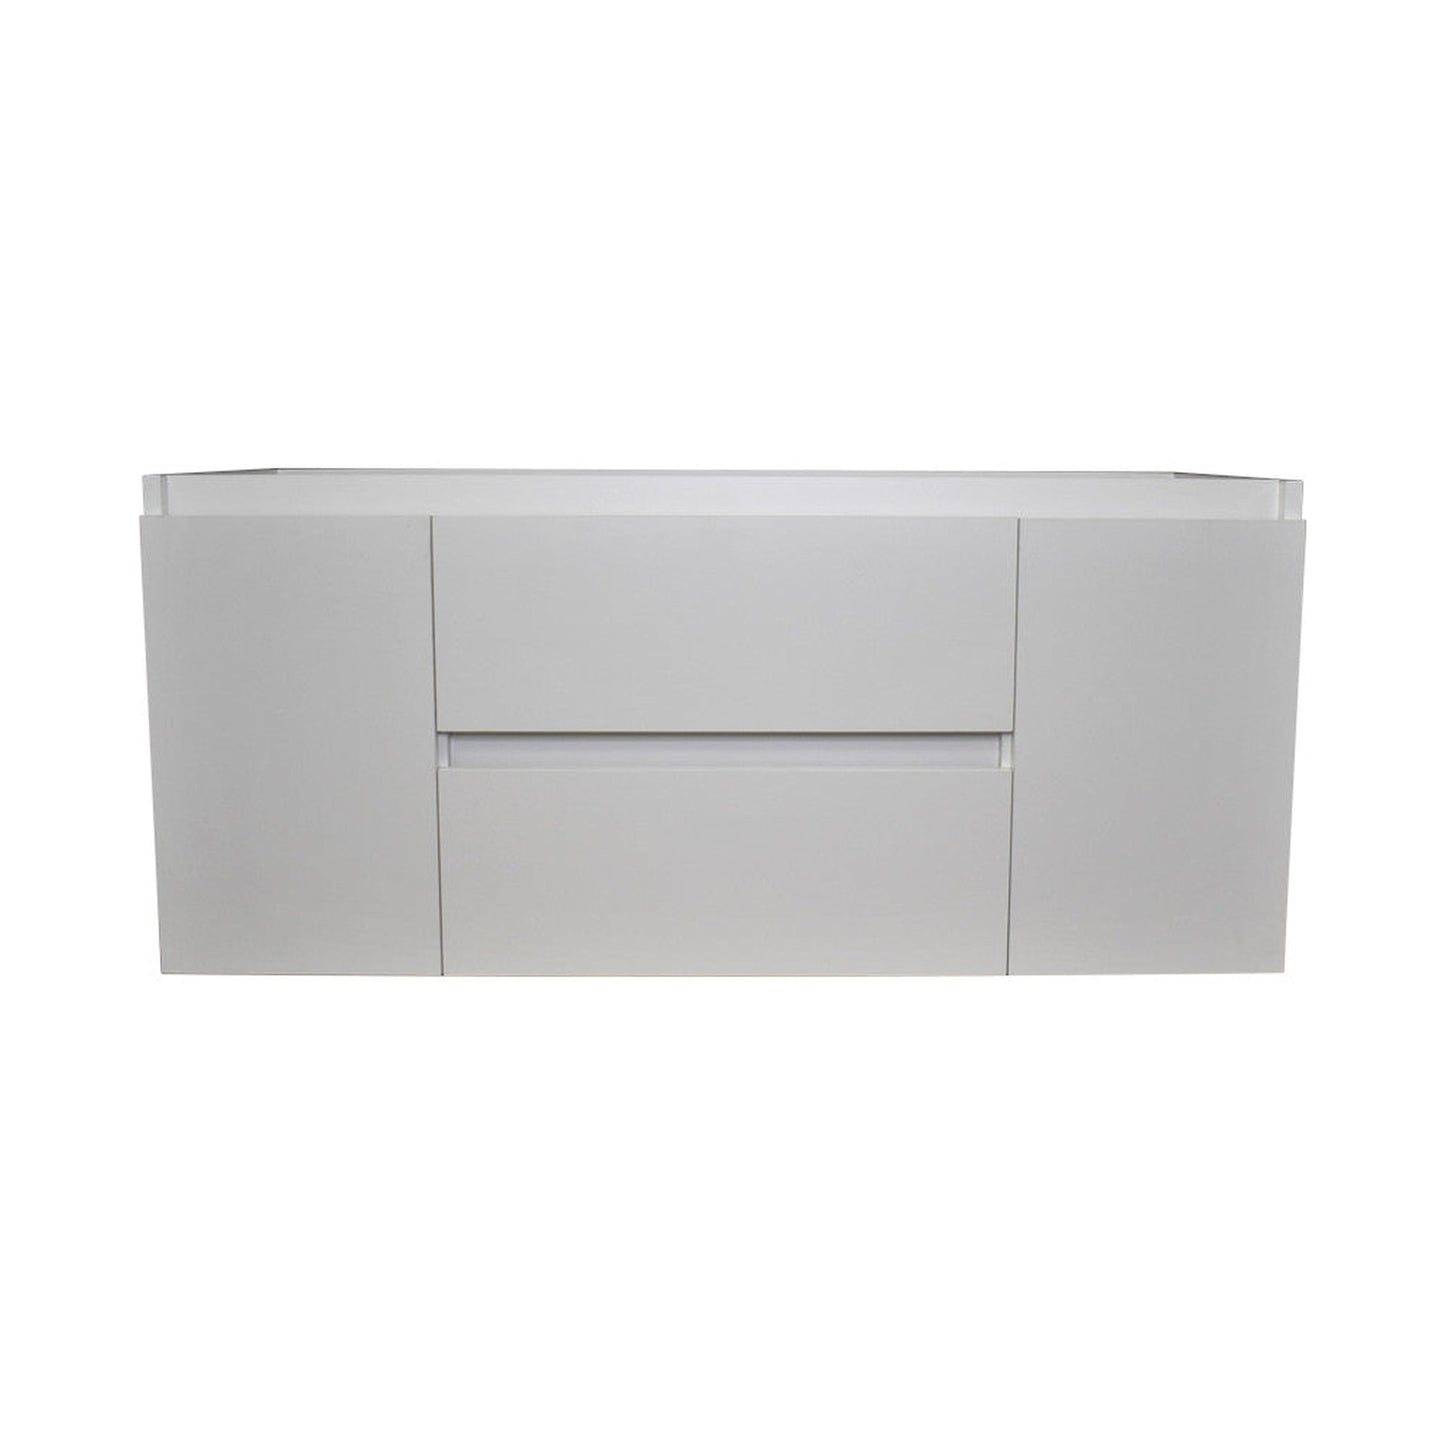 Volpa USA Salt 48" x 20" Glossy White Wall-Mounted Floating Bathroom Vanity Cabinet with Drawers